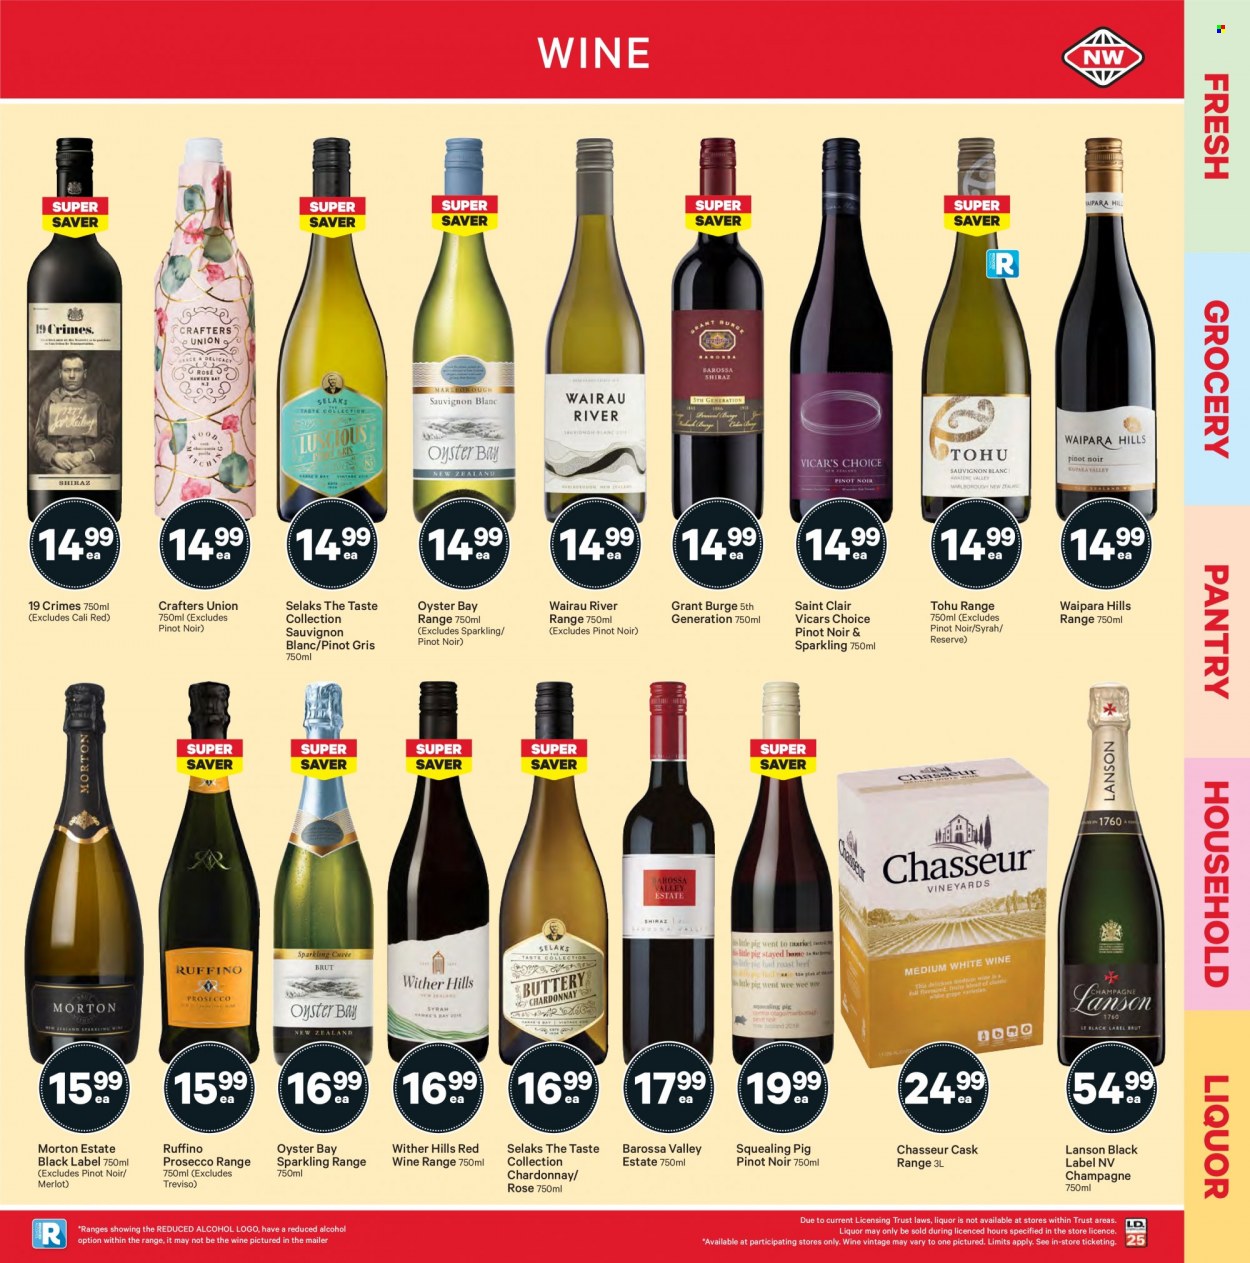 thumbnail - New World mailer - 20.09.2021 - 26.09.2021 - Sales products - oysters, red wine, white wine, champagne, prosecco, Chardonnay, wine, Merlot, Pinot Noir, Lanson, alcohol, Wither Hills, Syrah, Pinot Grigio, Sauvignon Blanc, rosé wine, Trust, Hill's. Page 25.